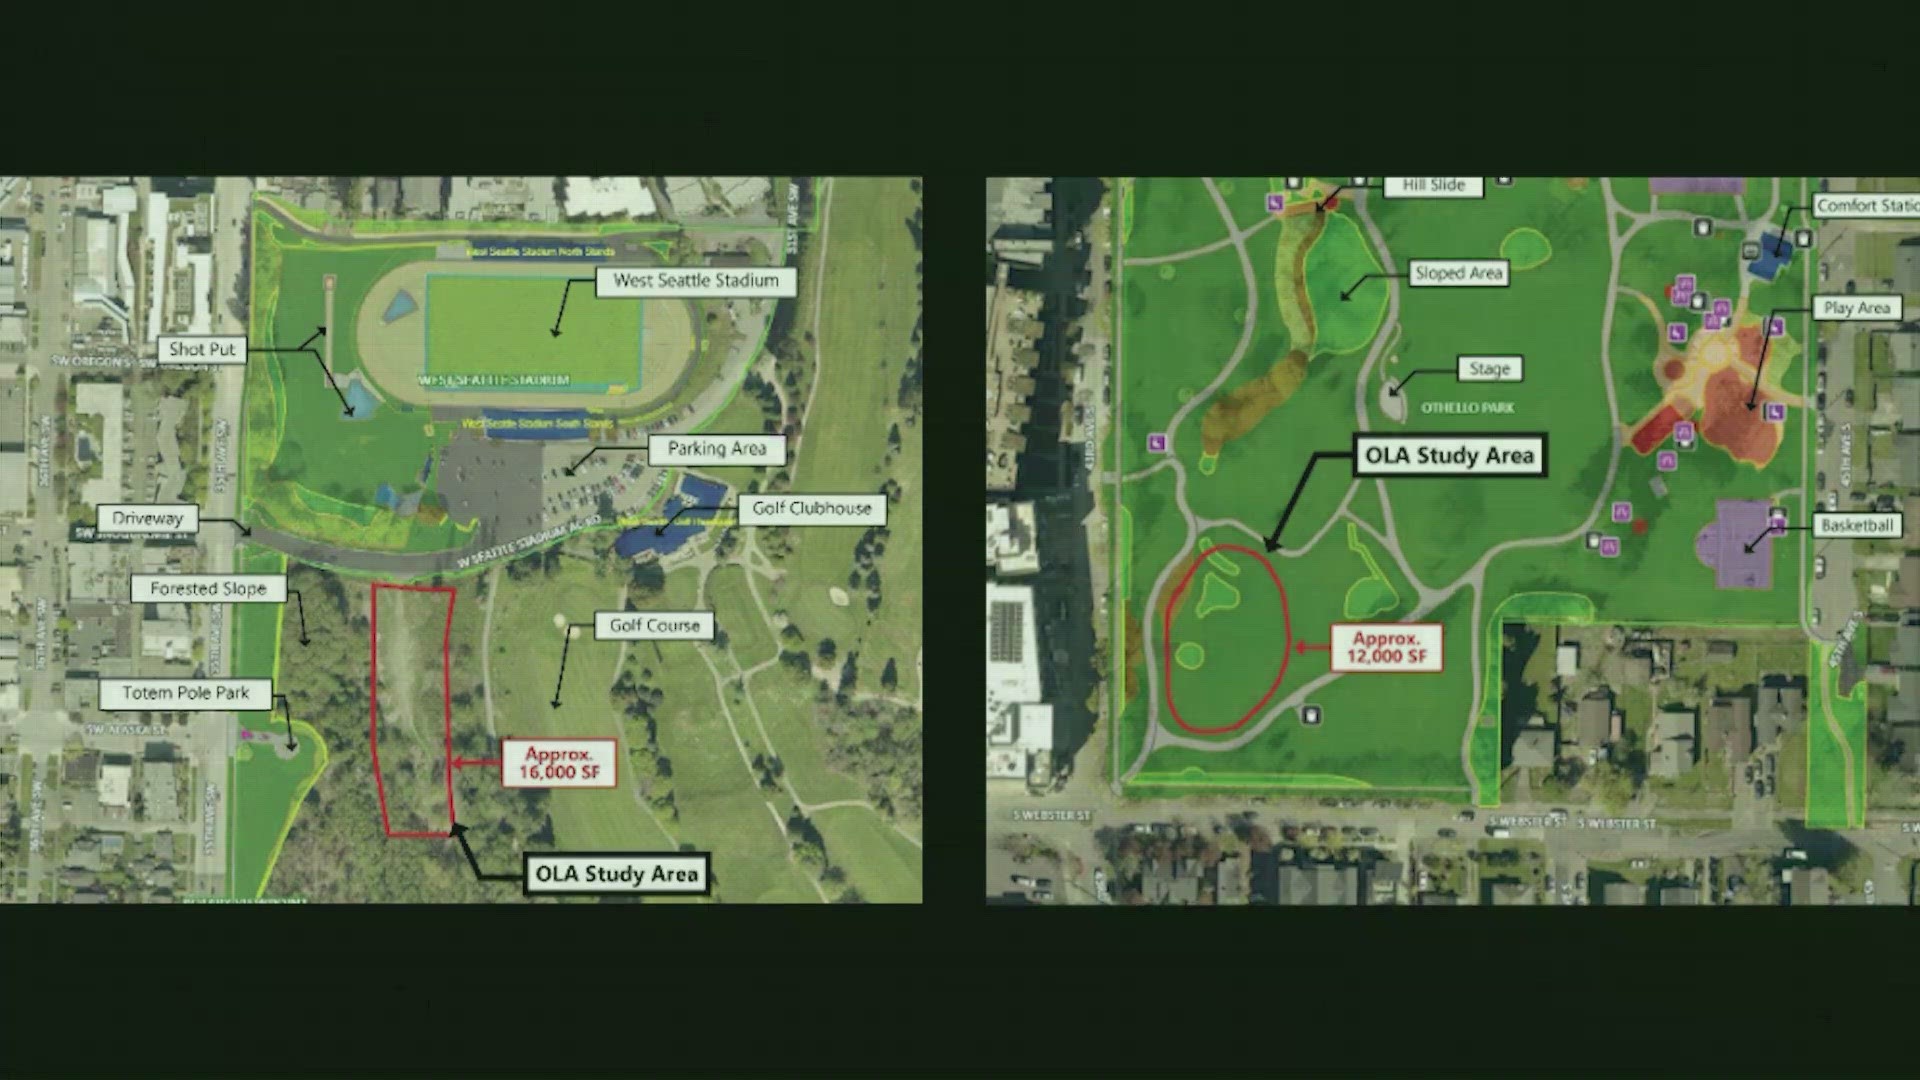 The city of Seattle is getting two new dog parks at West Seattle Stadium and Othello Park.